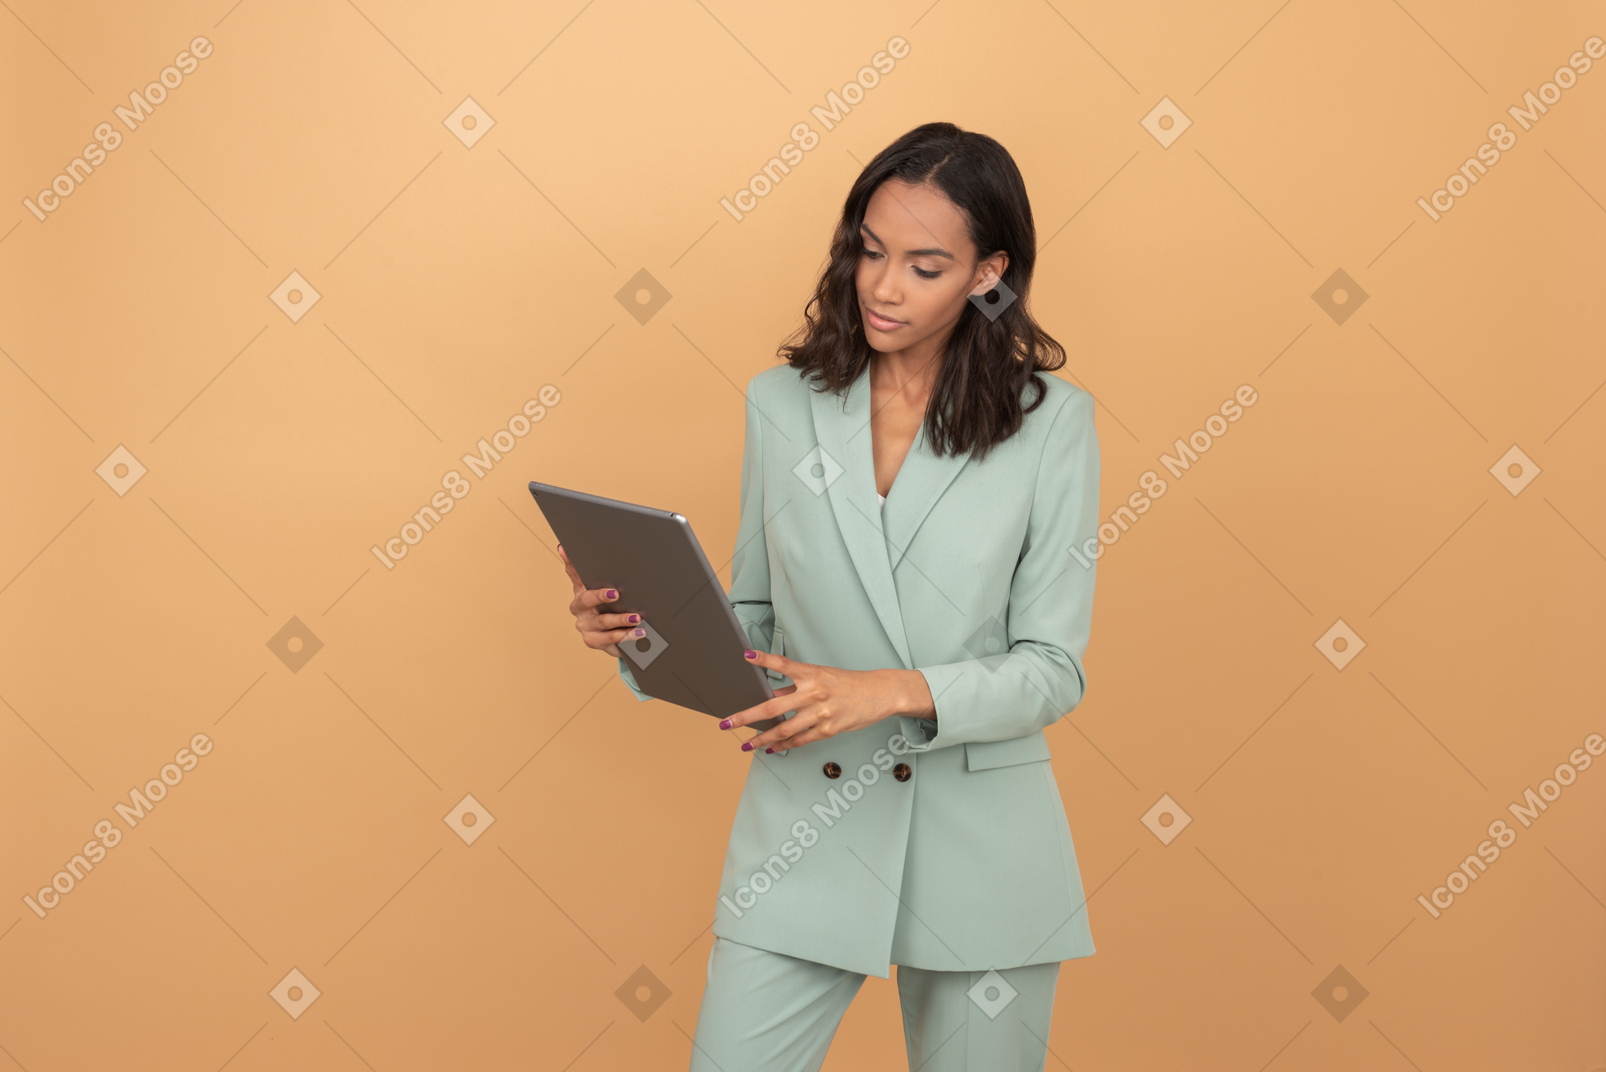 Attractive young office worker  looking at something attentively